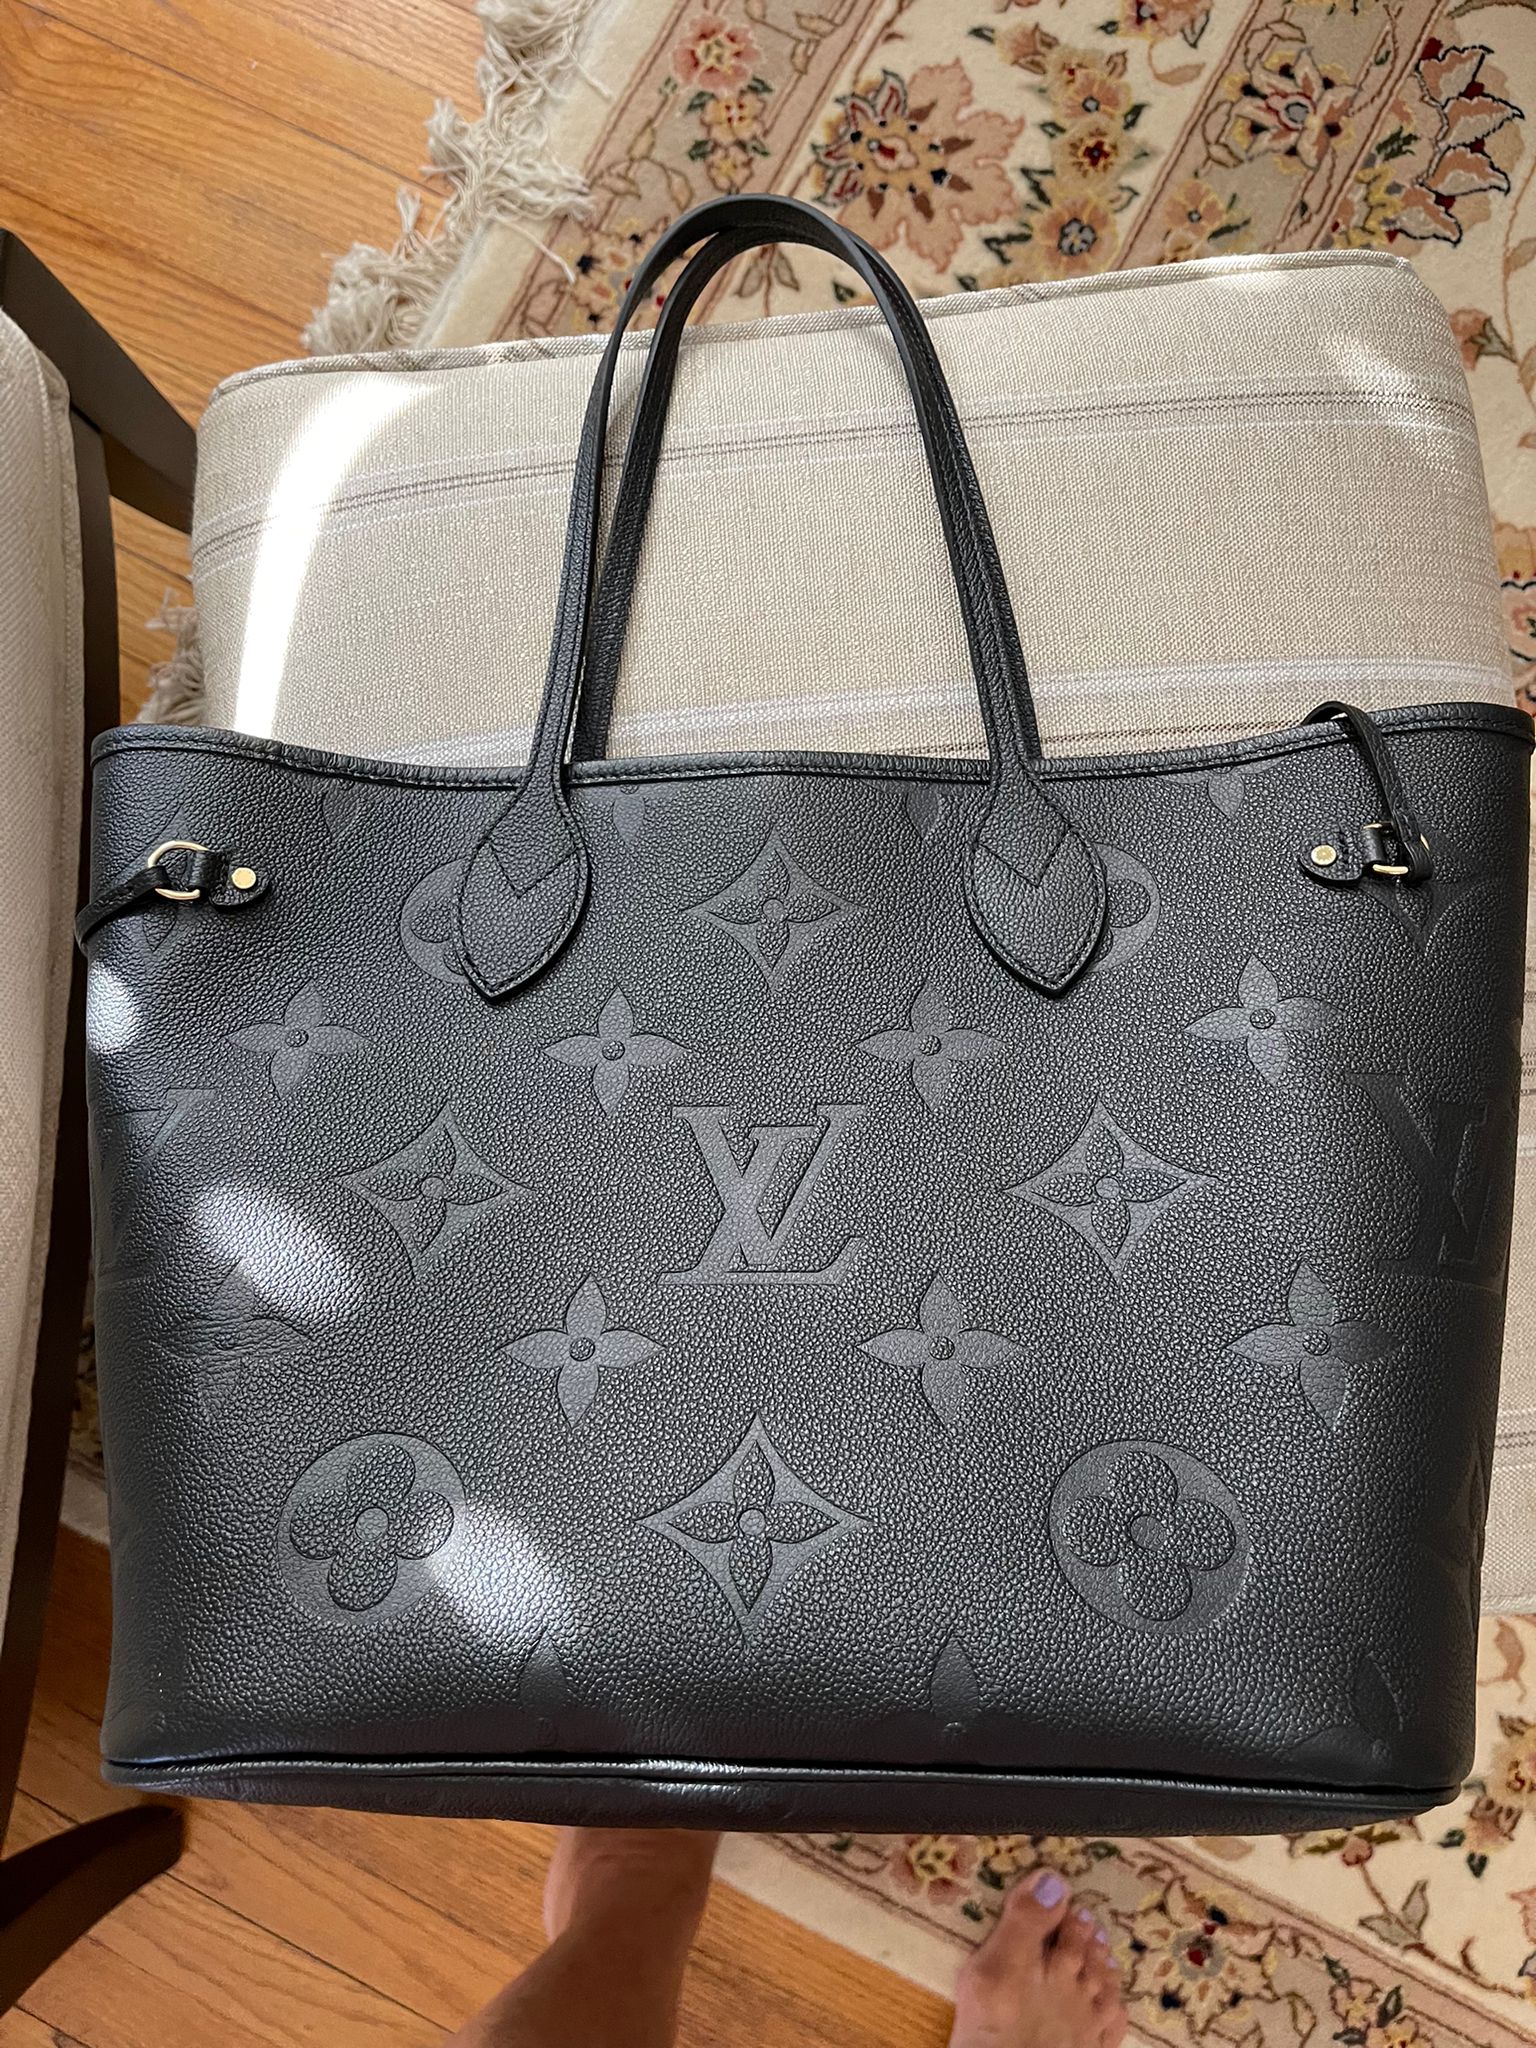 BREAKING NEWS - LV Neverfull Discontinued TODAY 